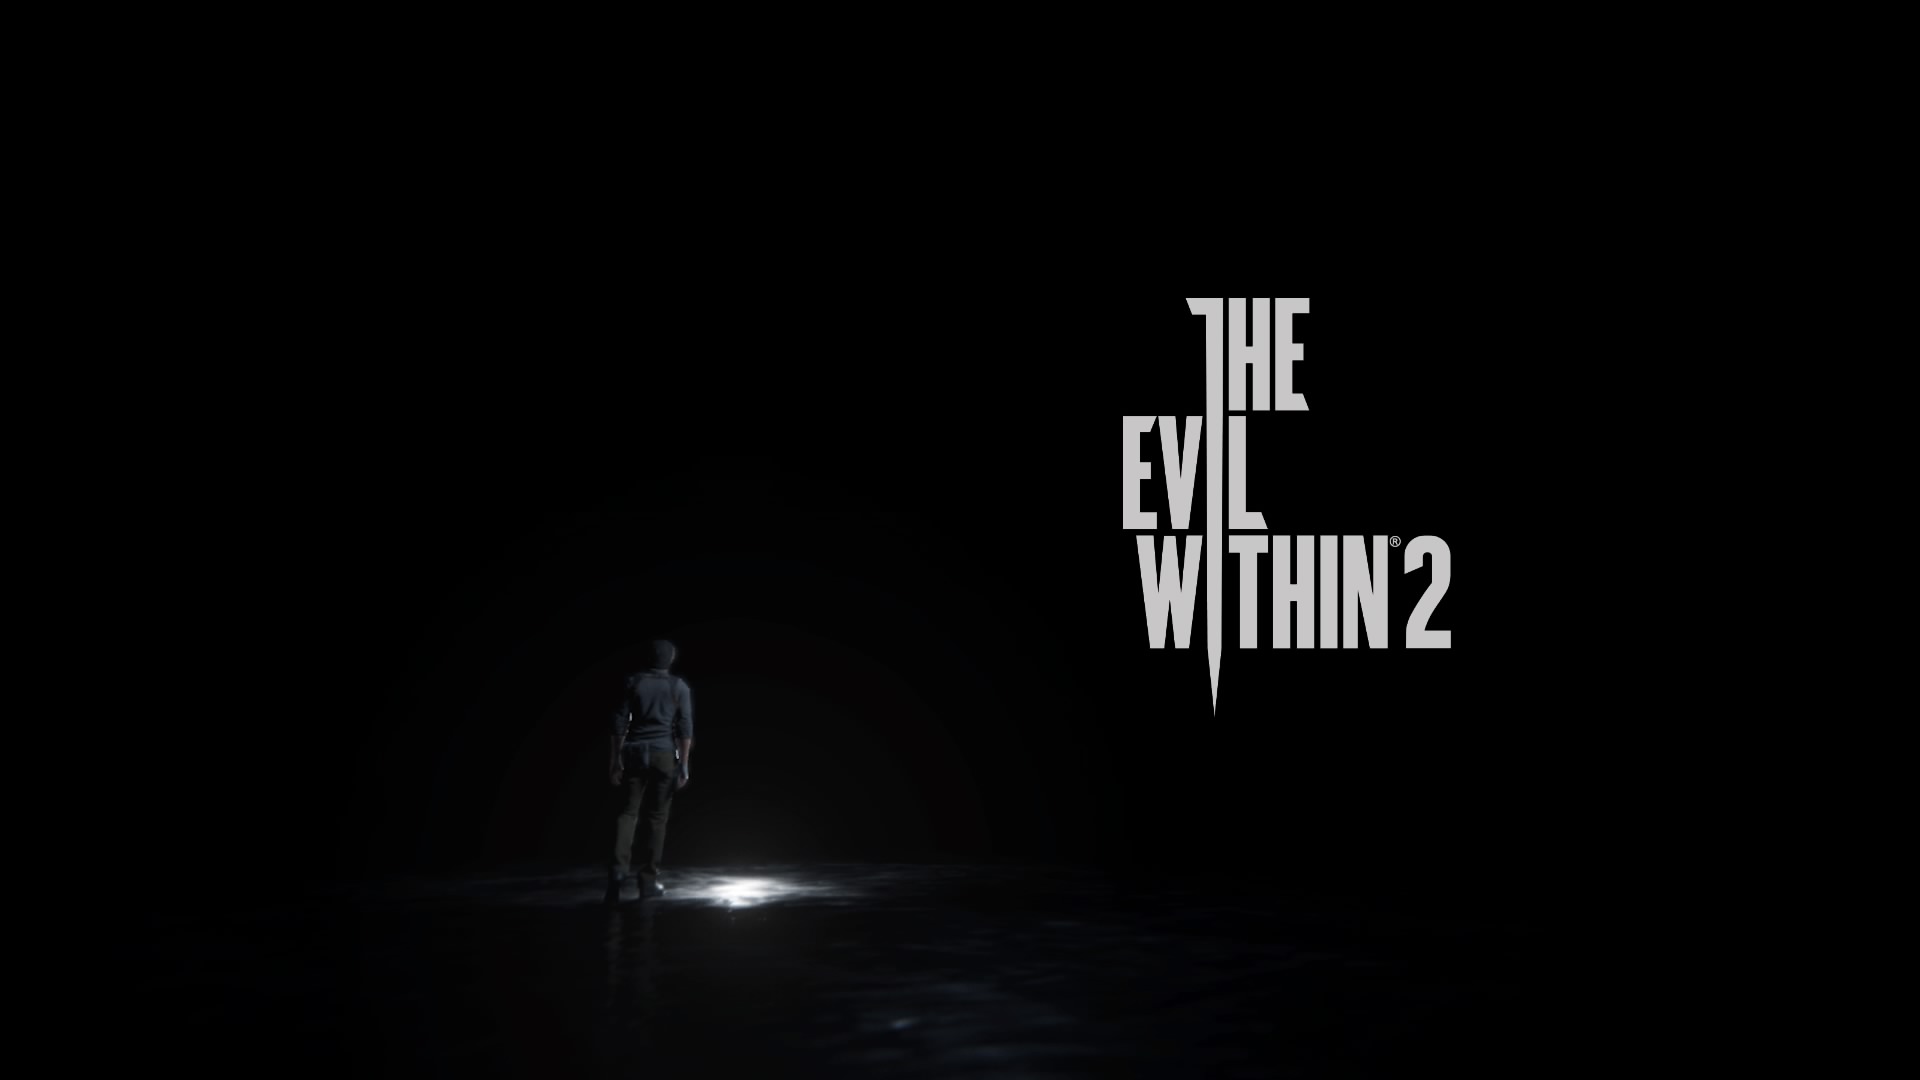 The Evil Within 2 (2017 – Survival Horror – Playstation 4)